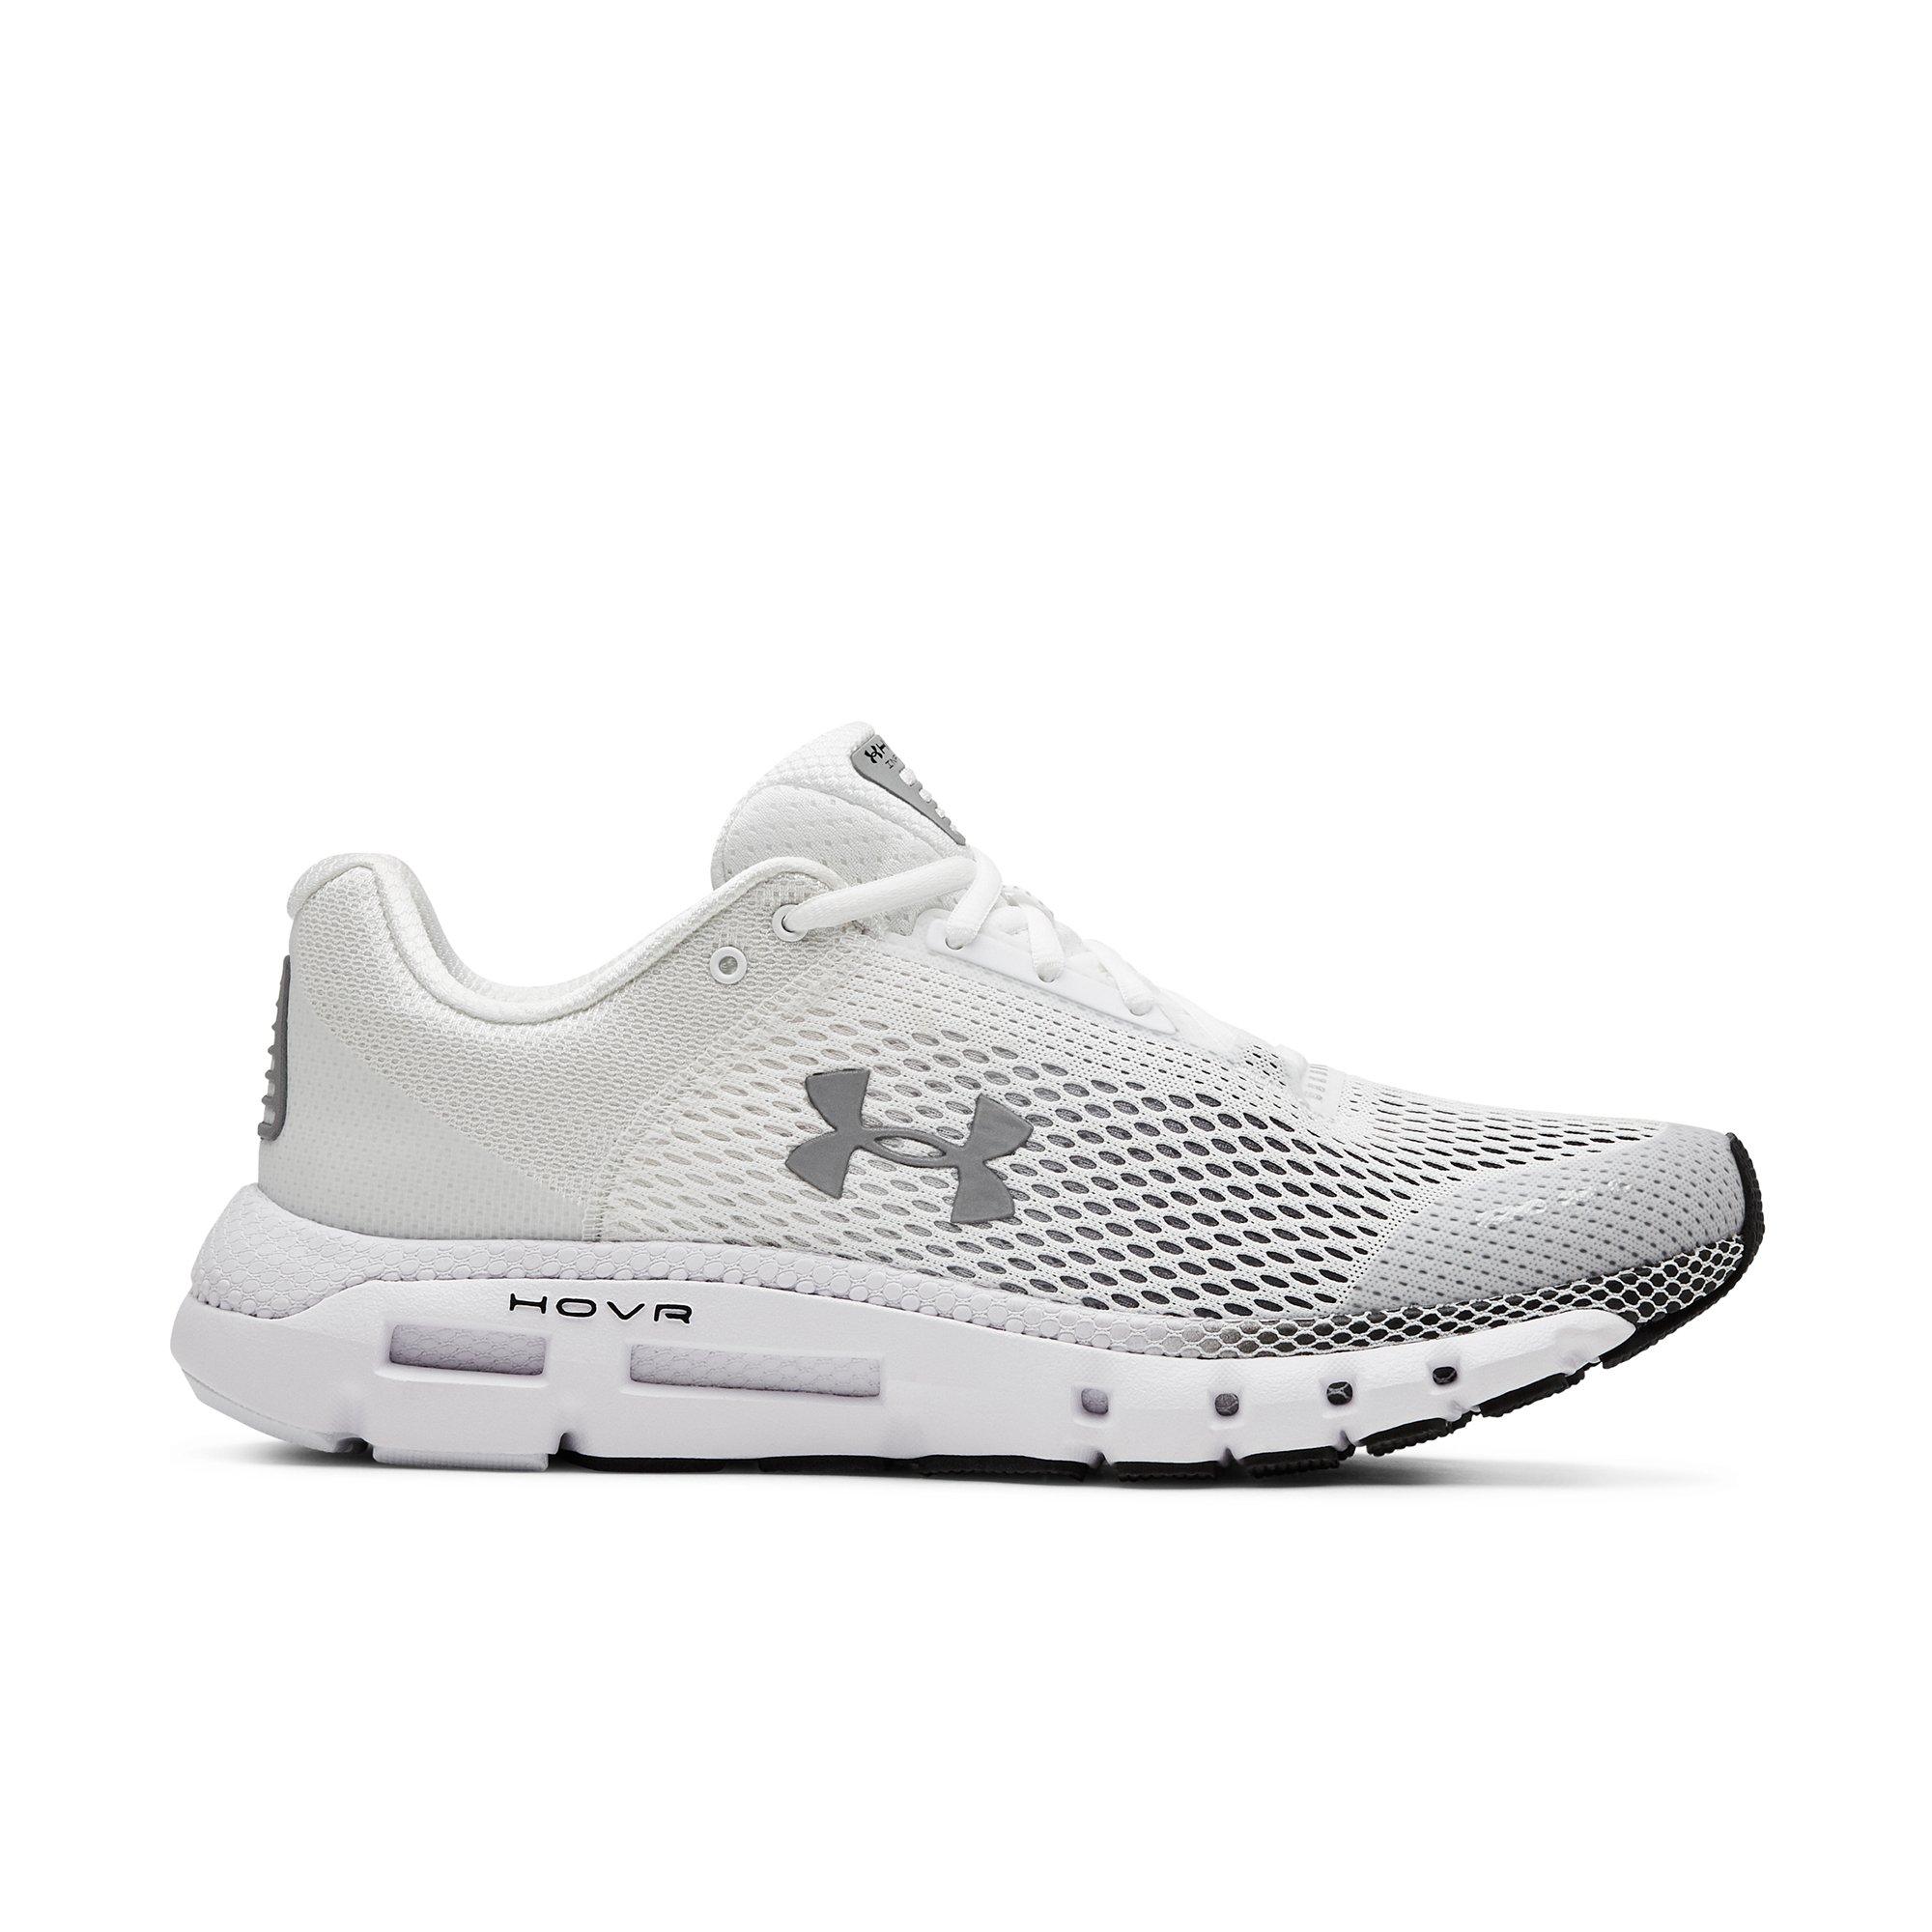 white mens under armour shoes